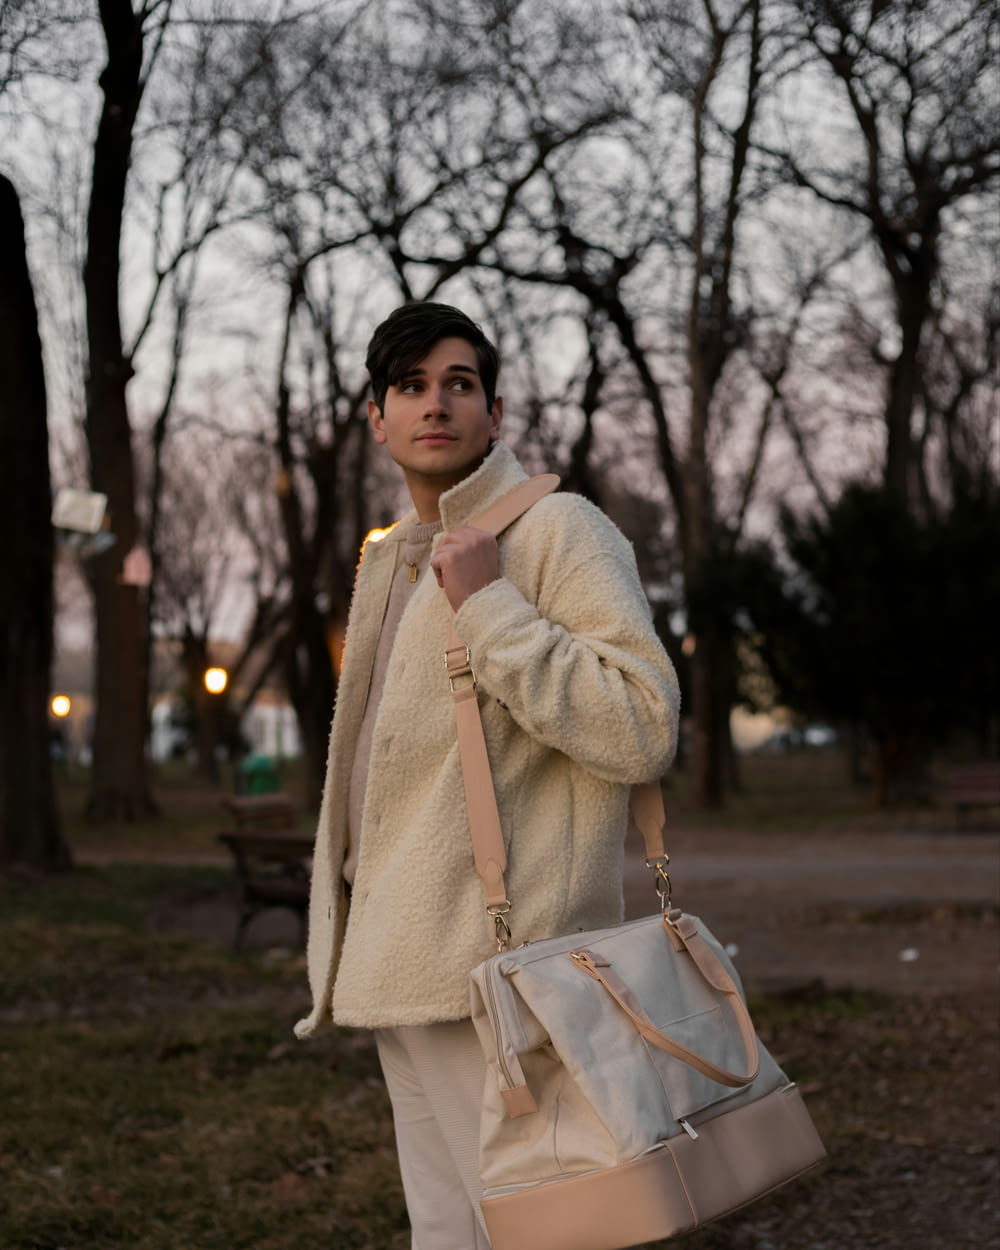 a man in a white jacket is holding a purse